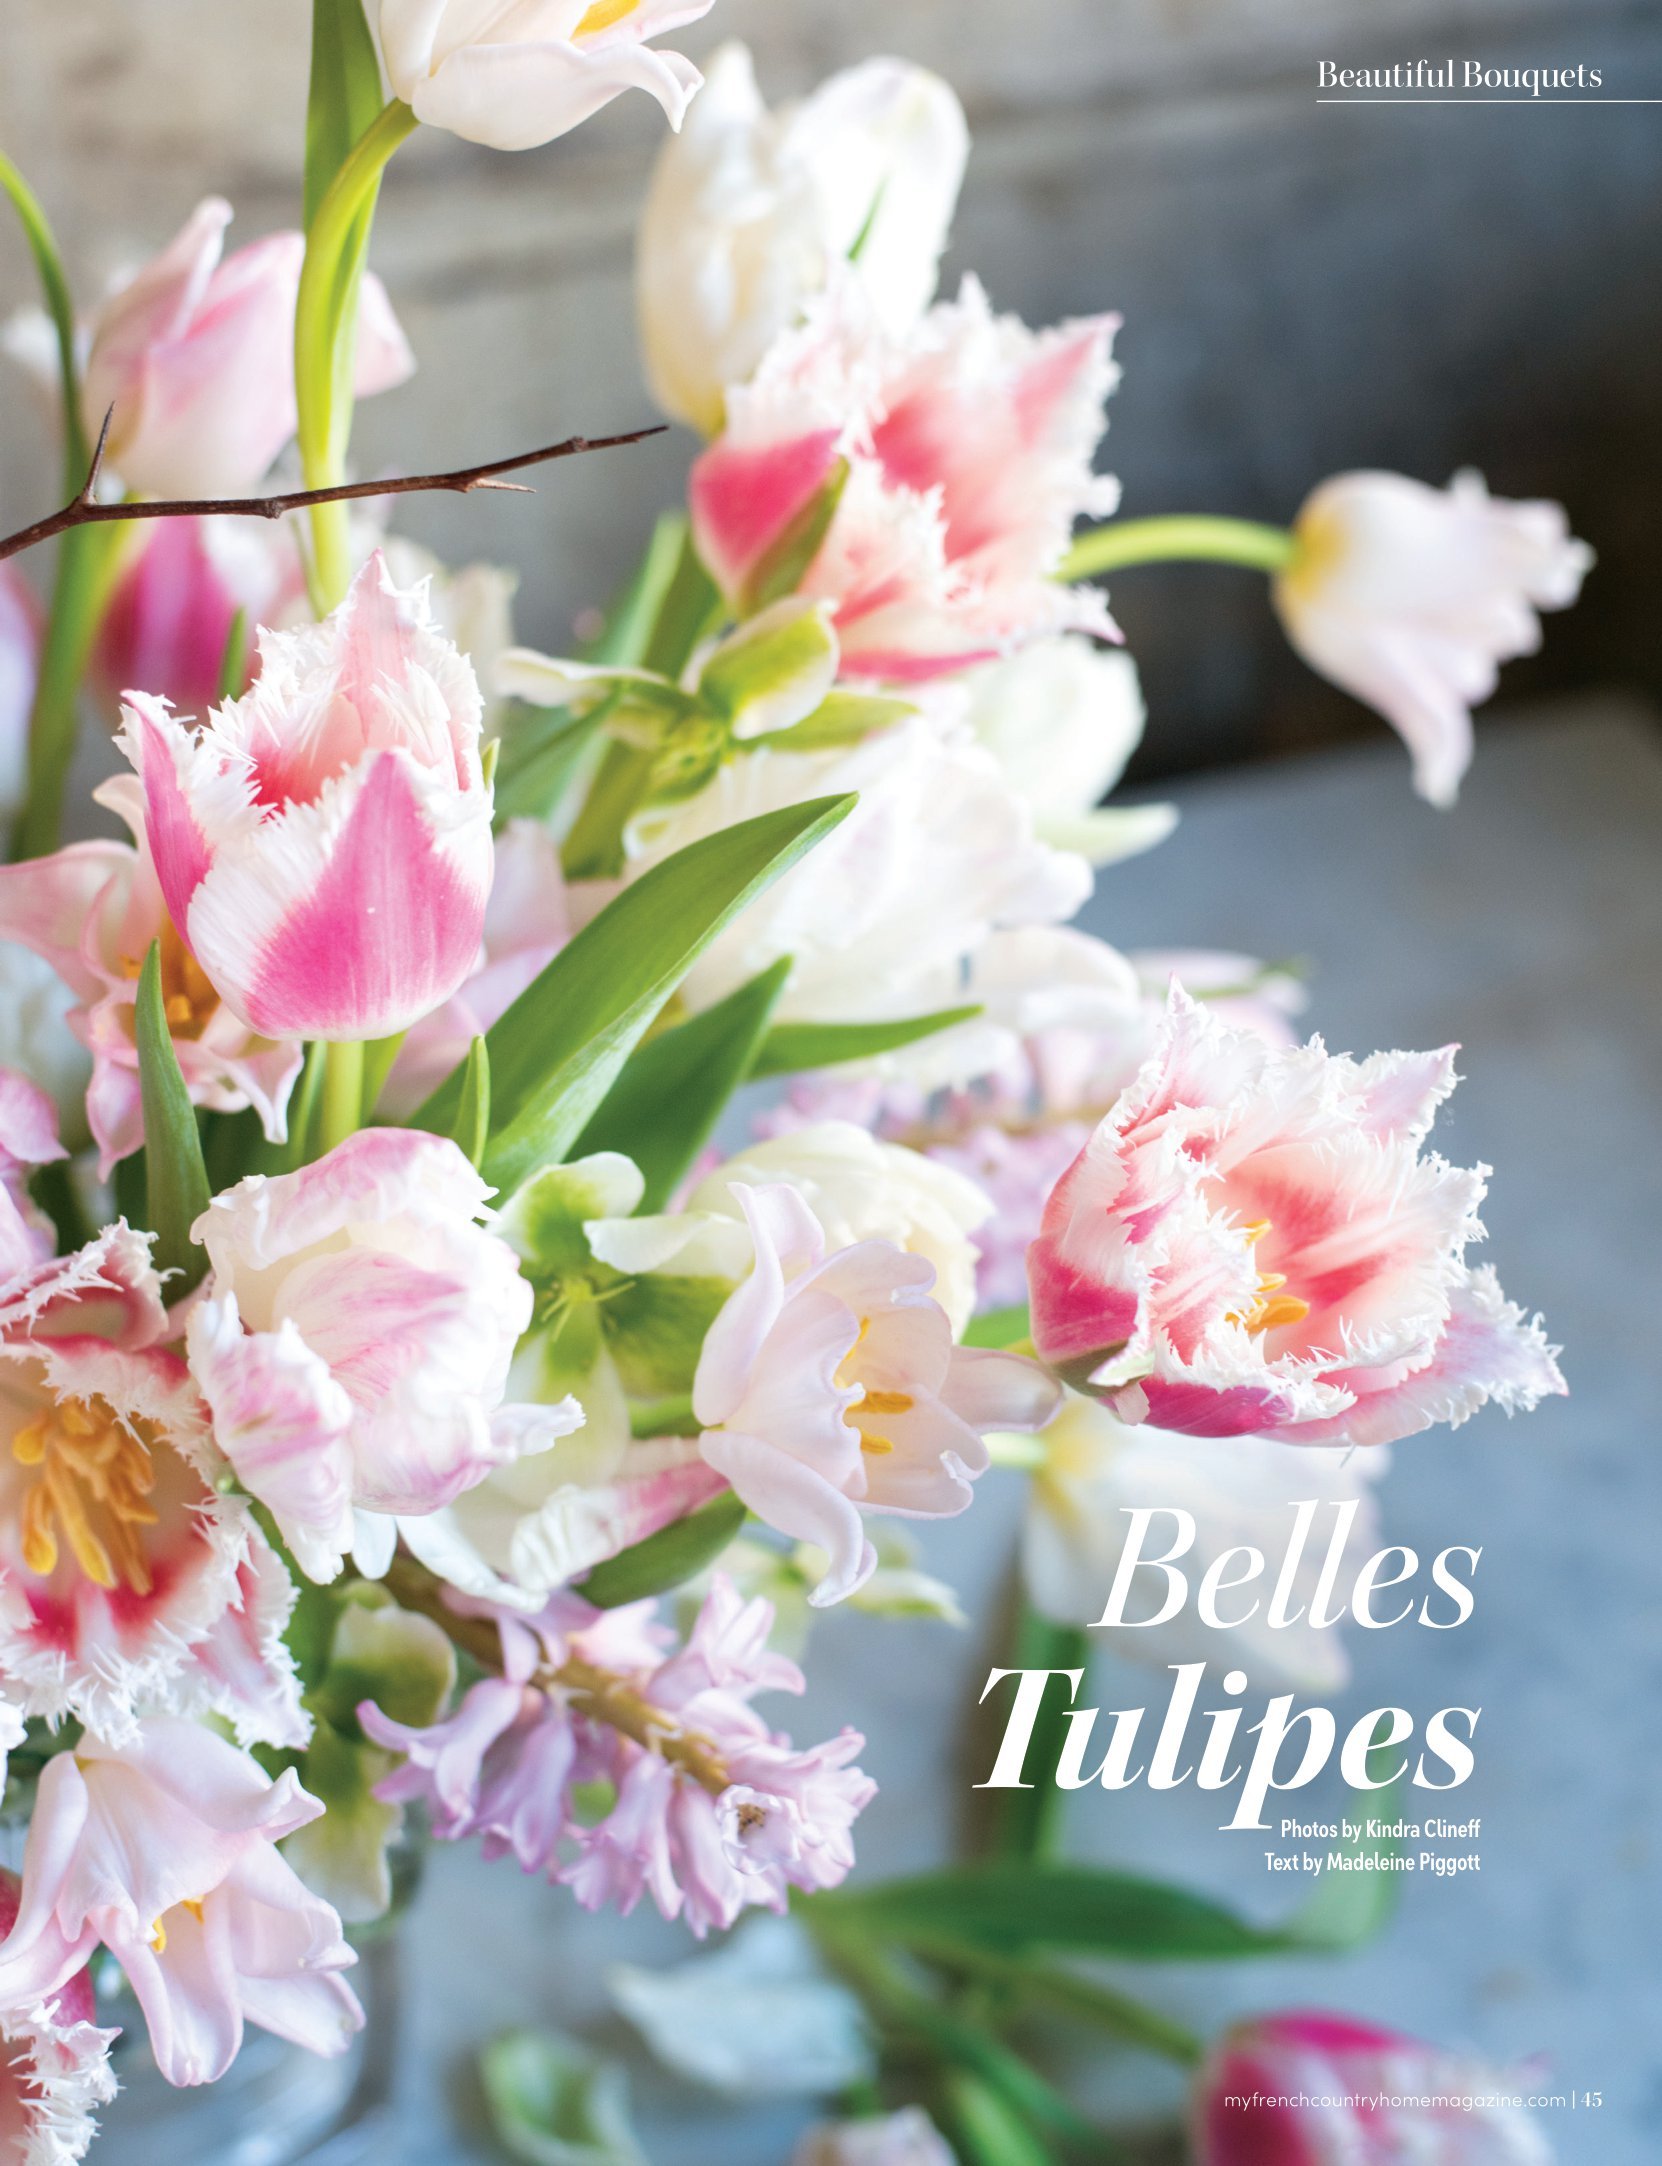 My French Country Home Magazine: Belles Tulipes